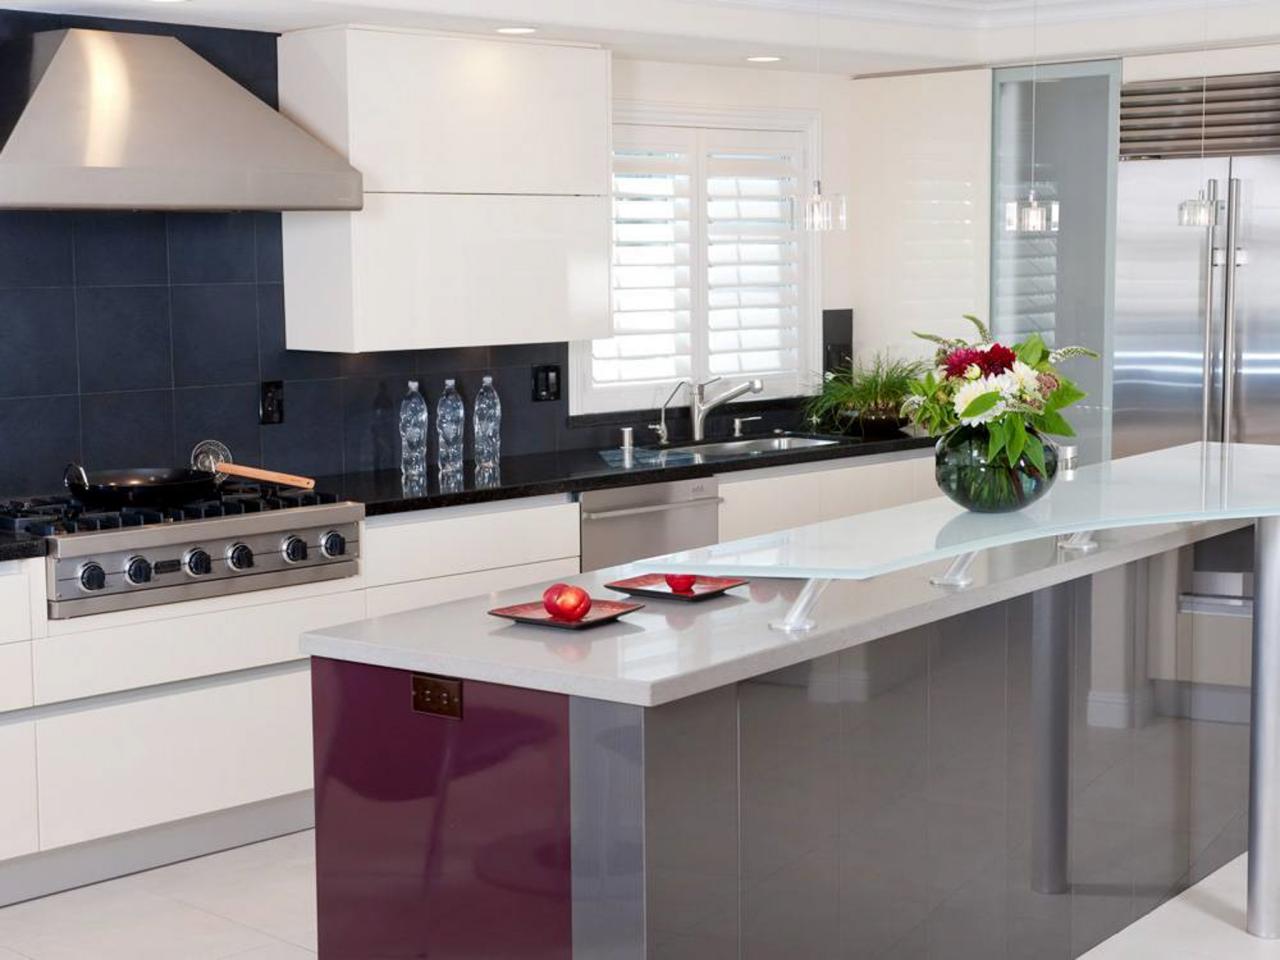 Modern Kitchen Ideas To Change The Look Of Your Kitchen